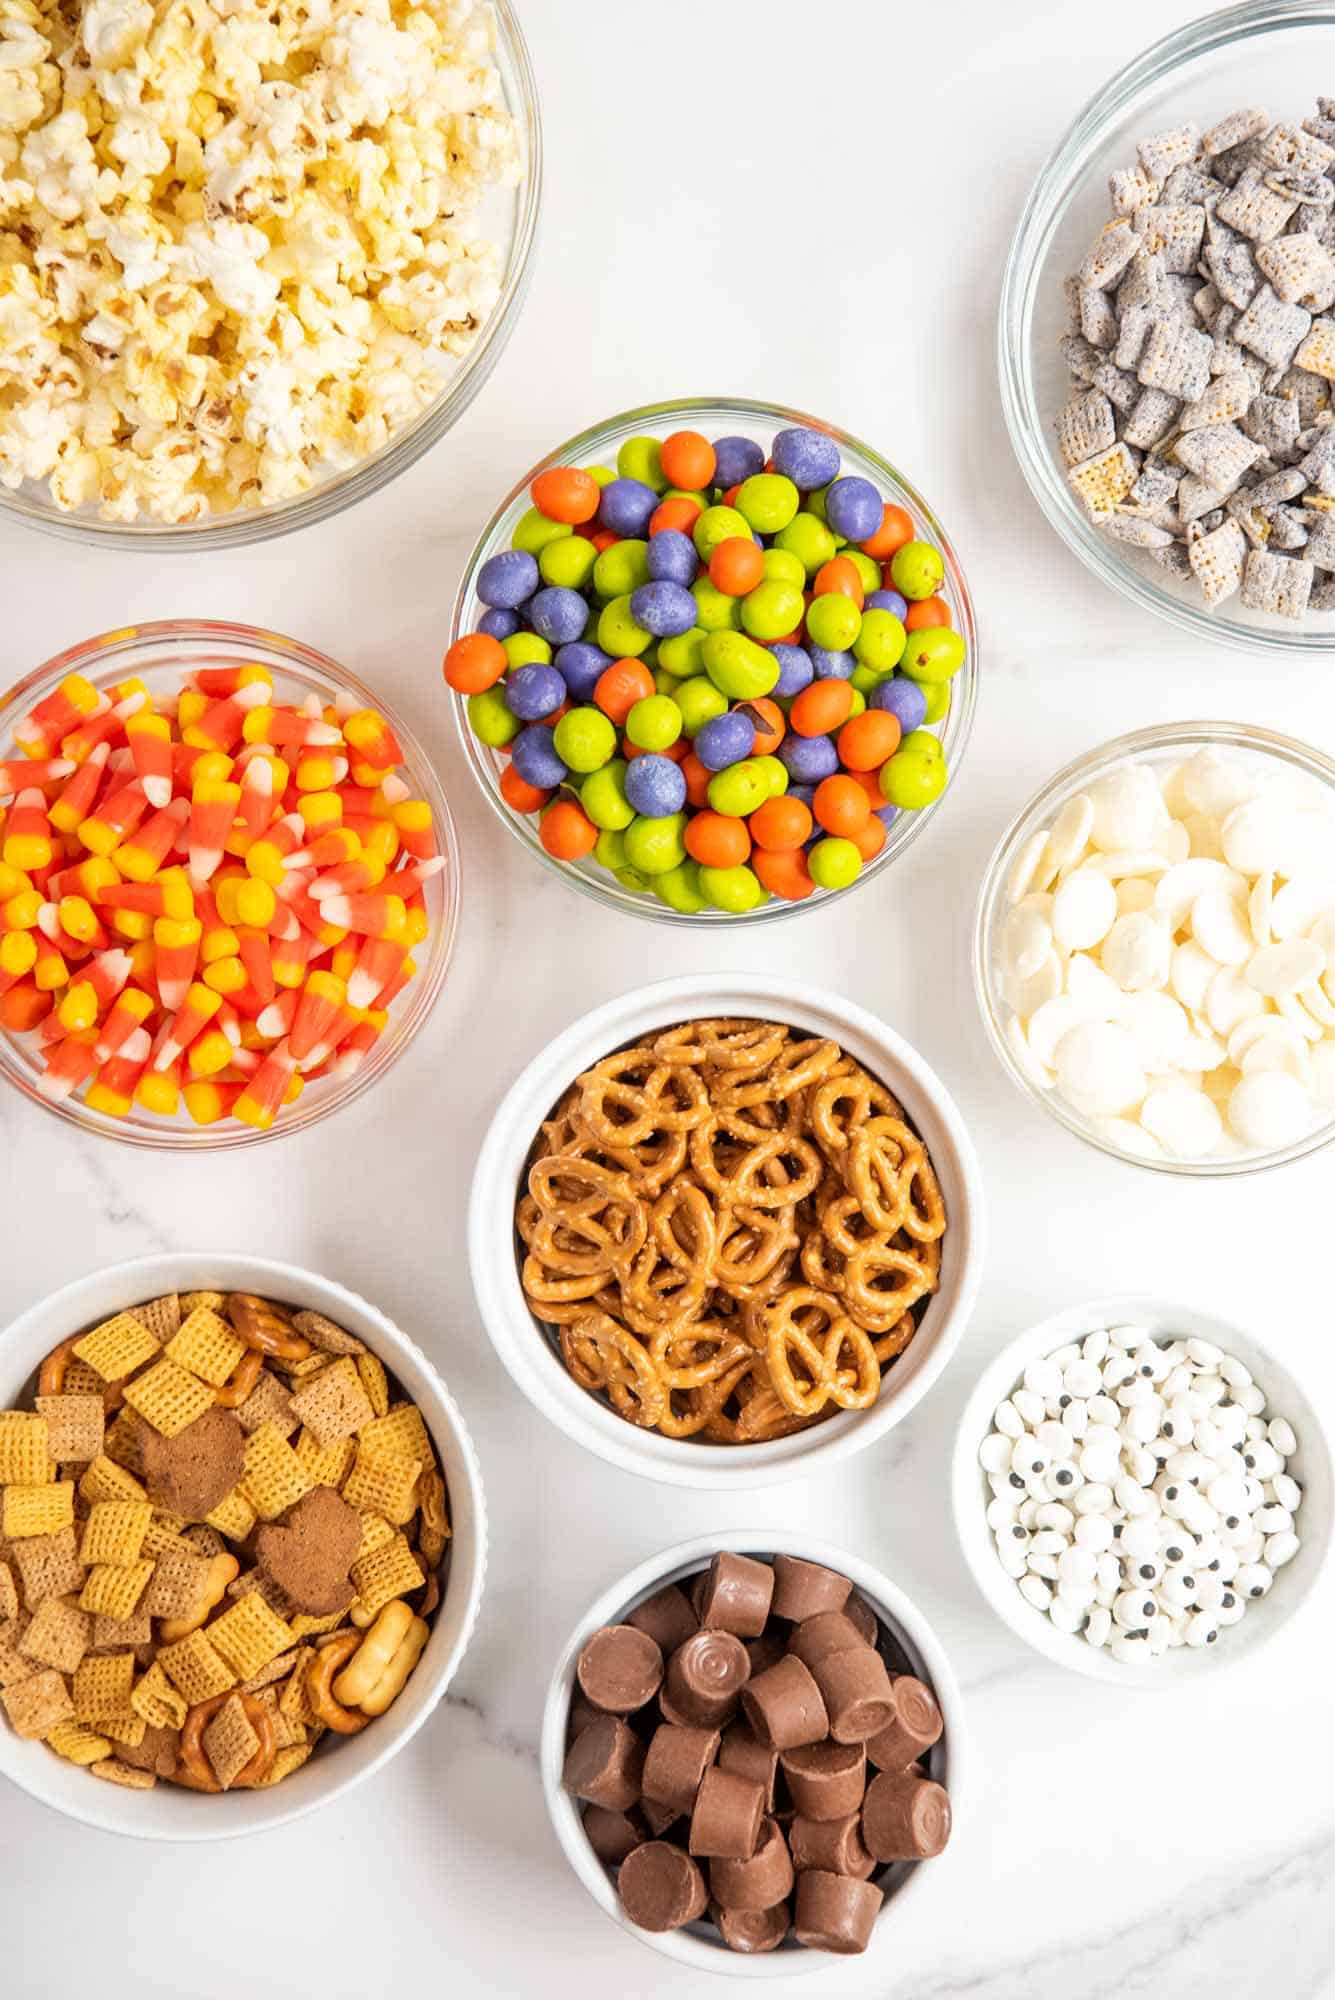 Ingredients needed to make halloween chex mix